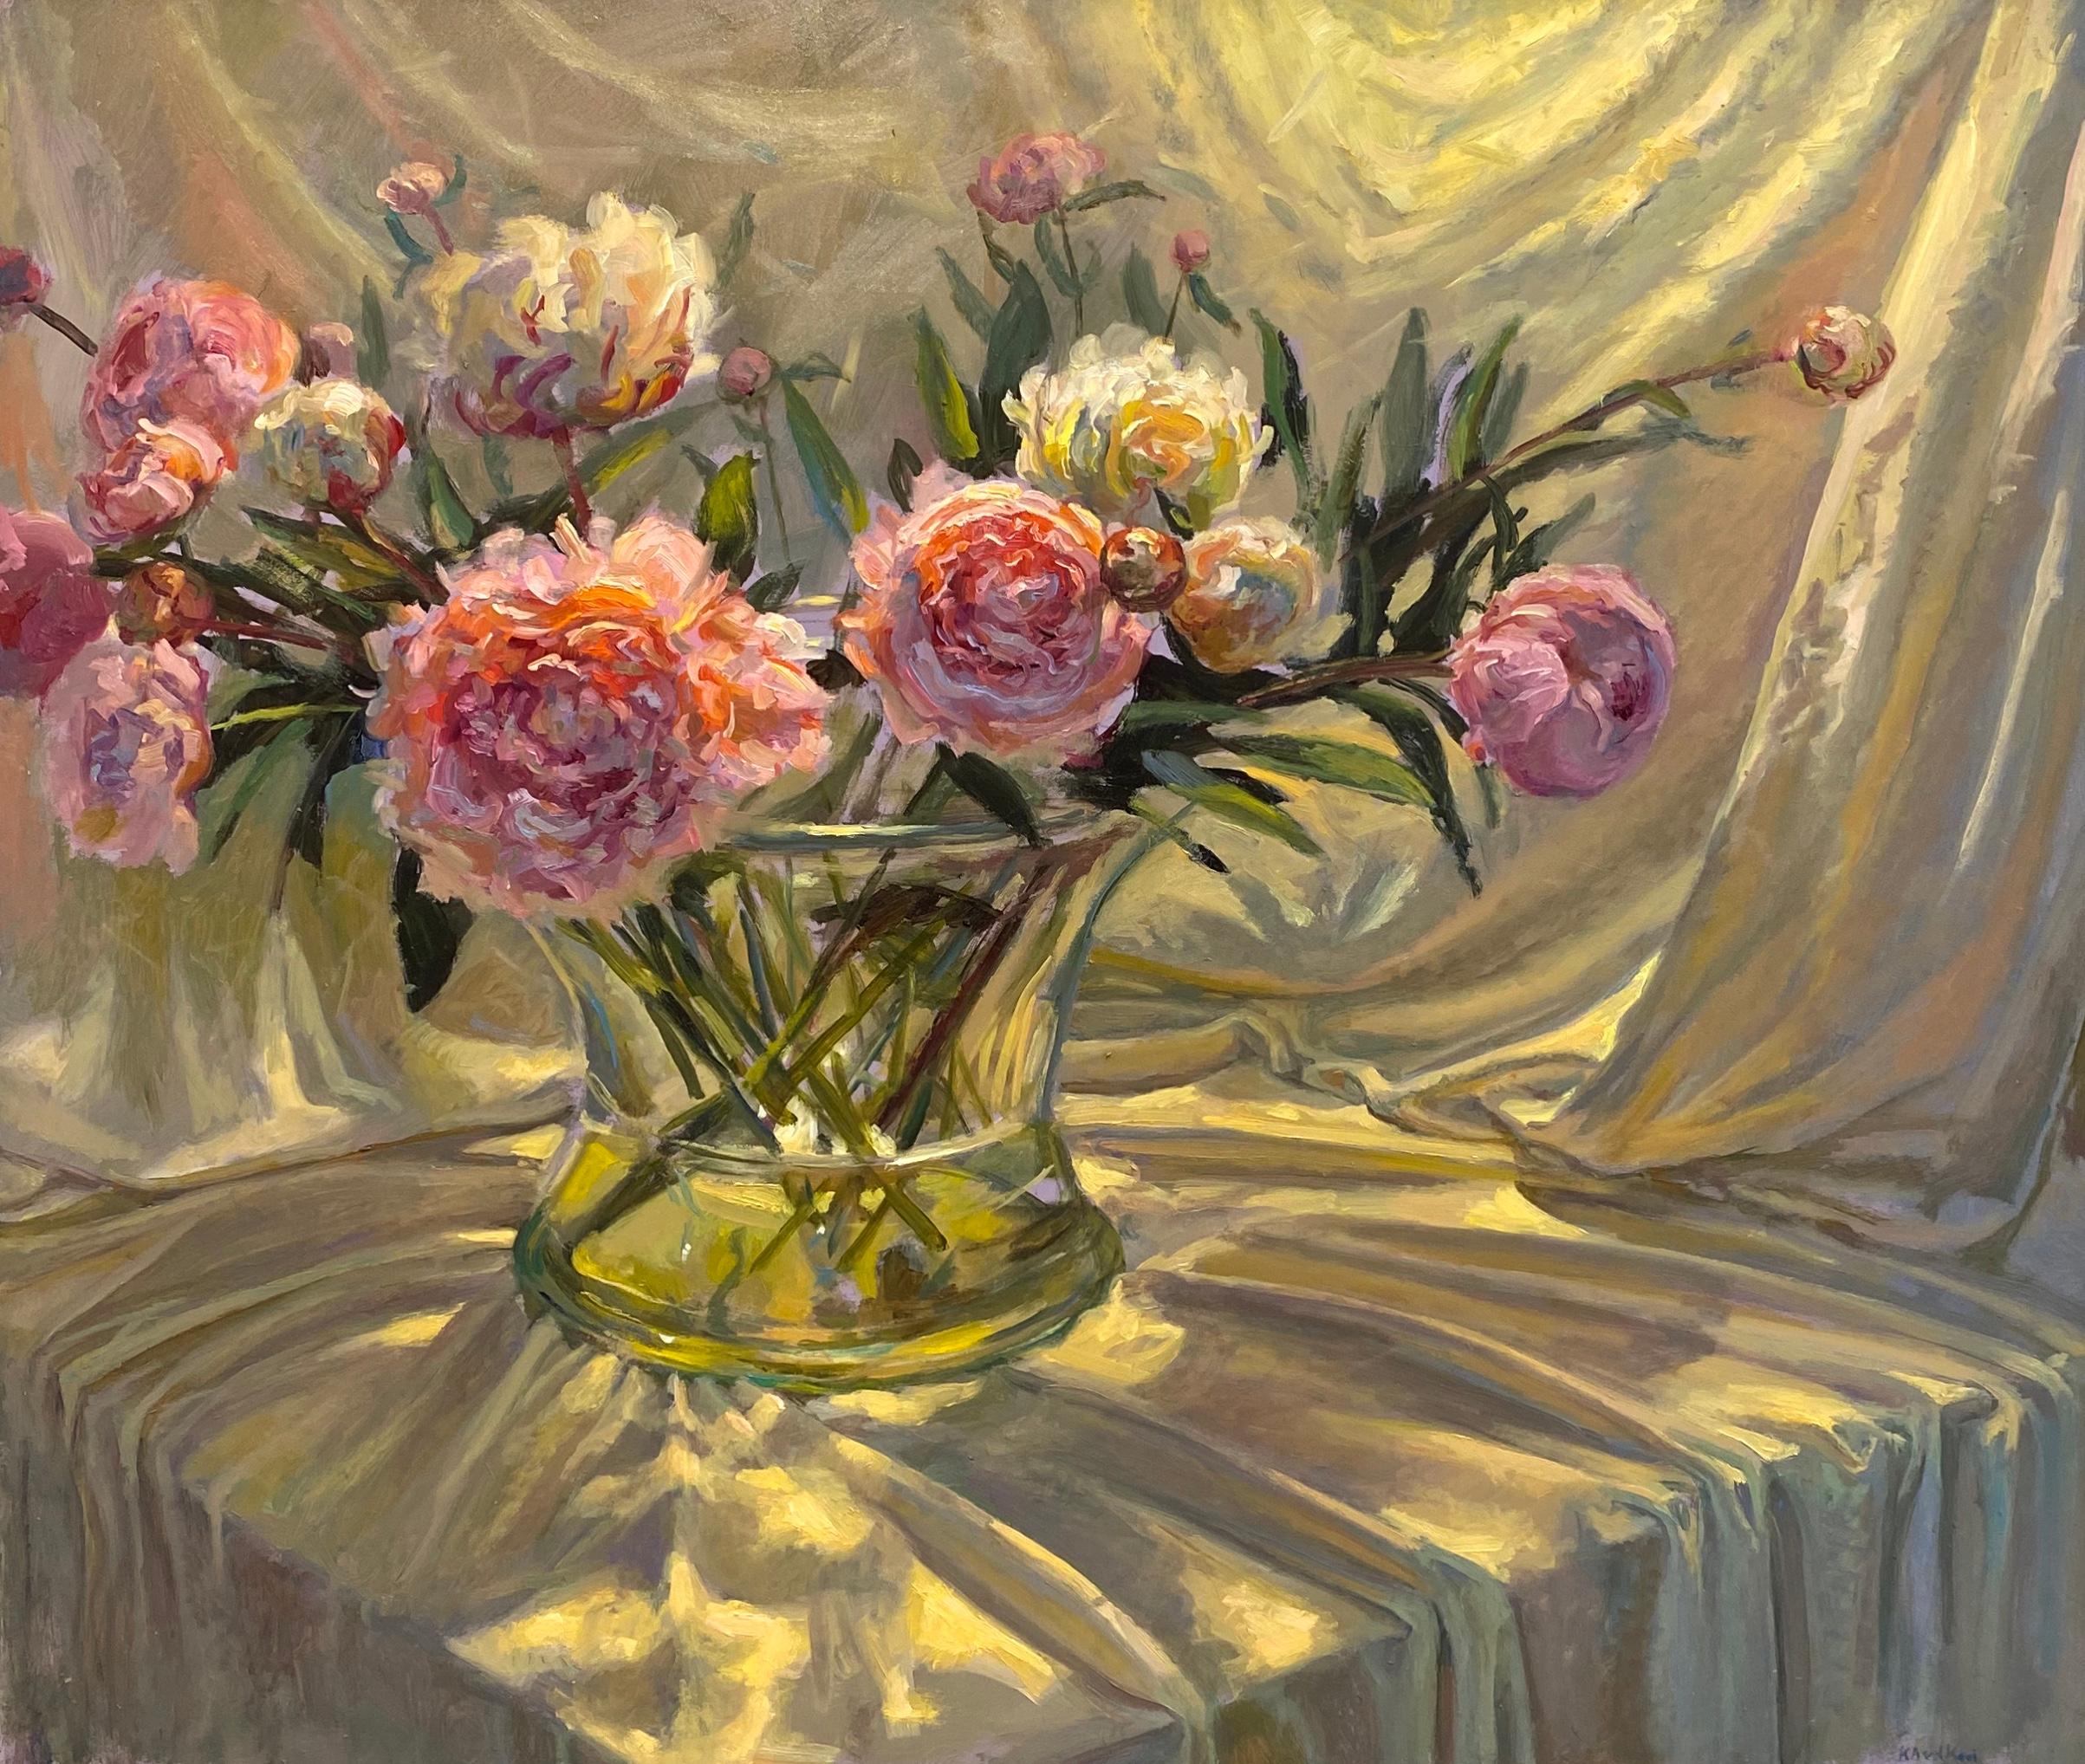 Keimpe van der Kooi Figurative Painting - Peonies - 21st Century Colorful Impressionistic oil painting with flowers